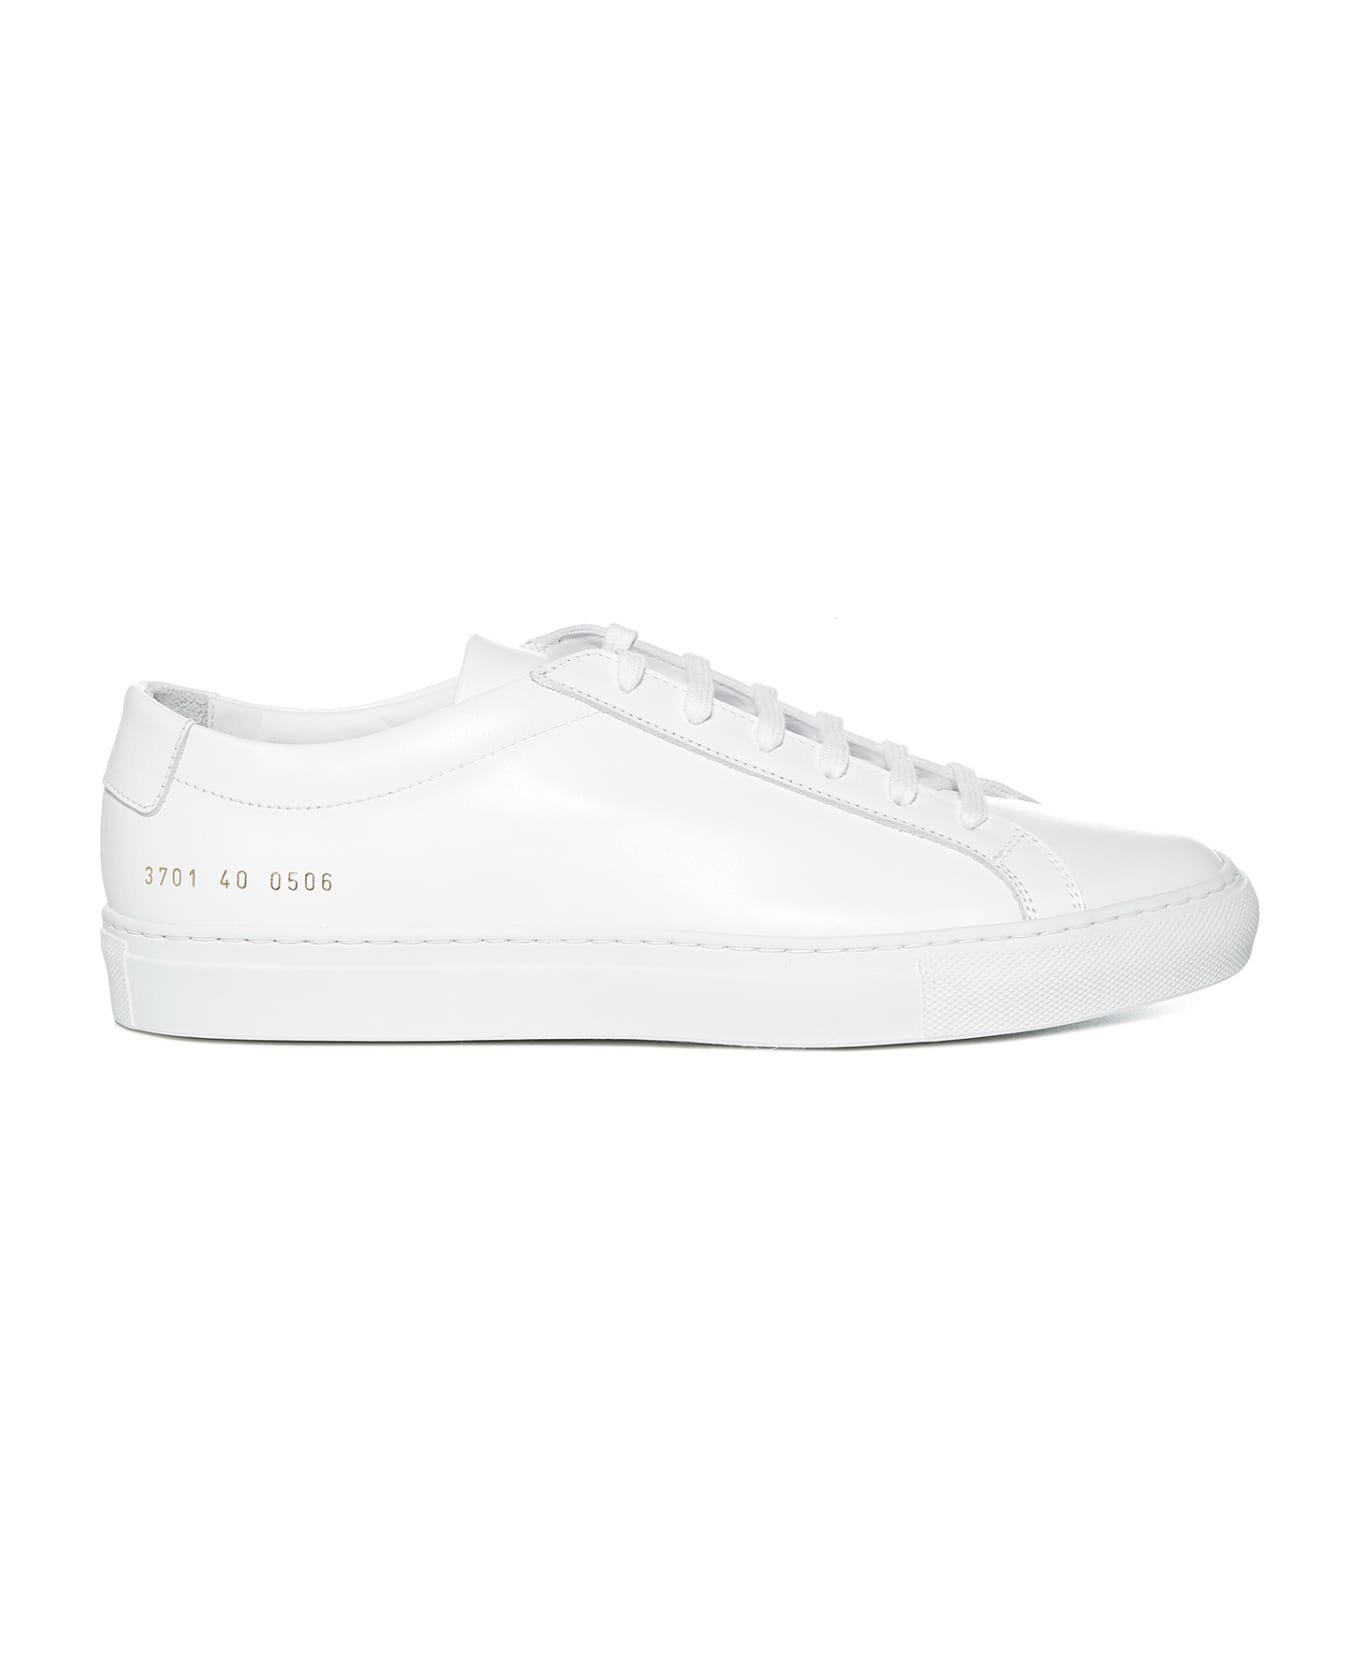 Common Projects Original Achilles Sneakers - White スニーカー